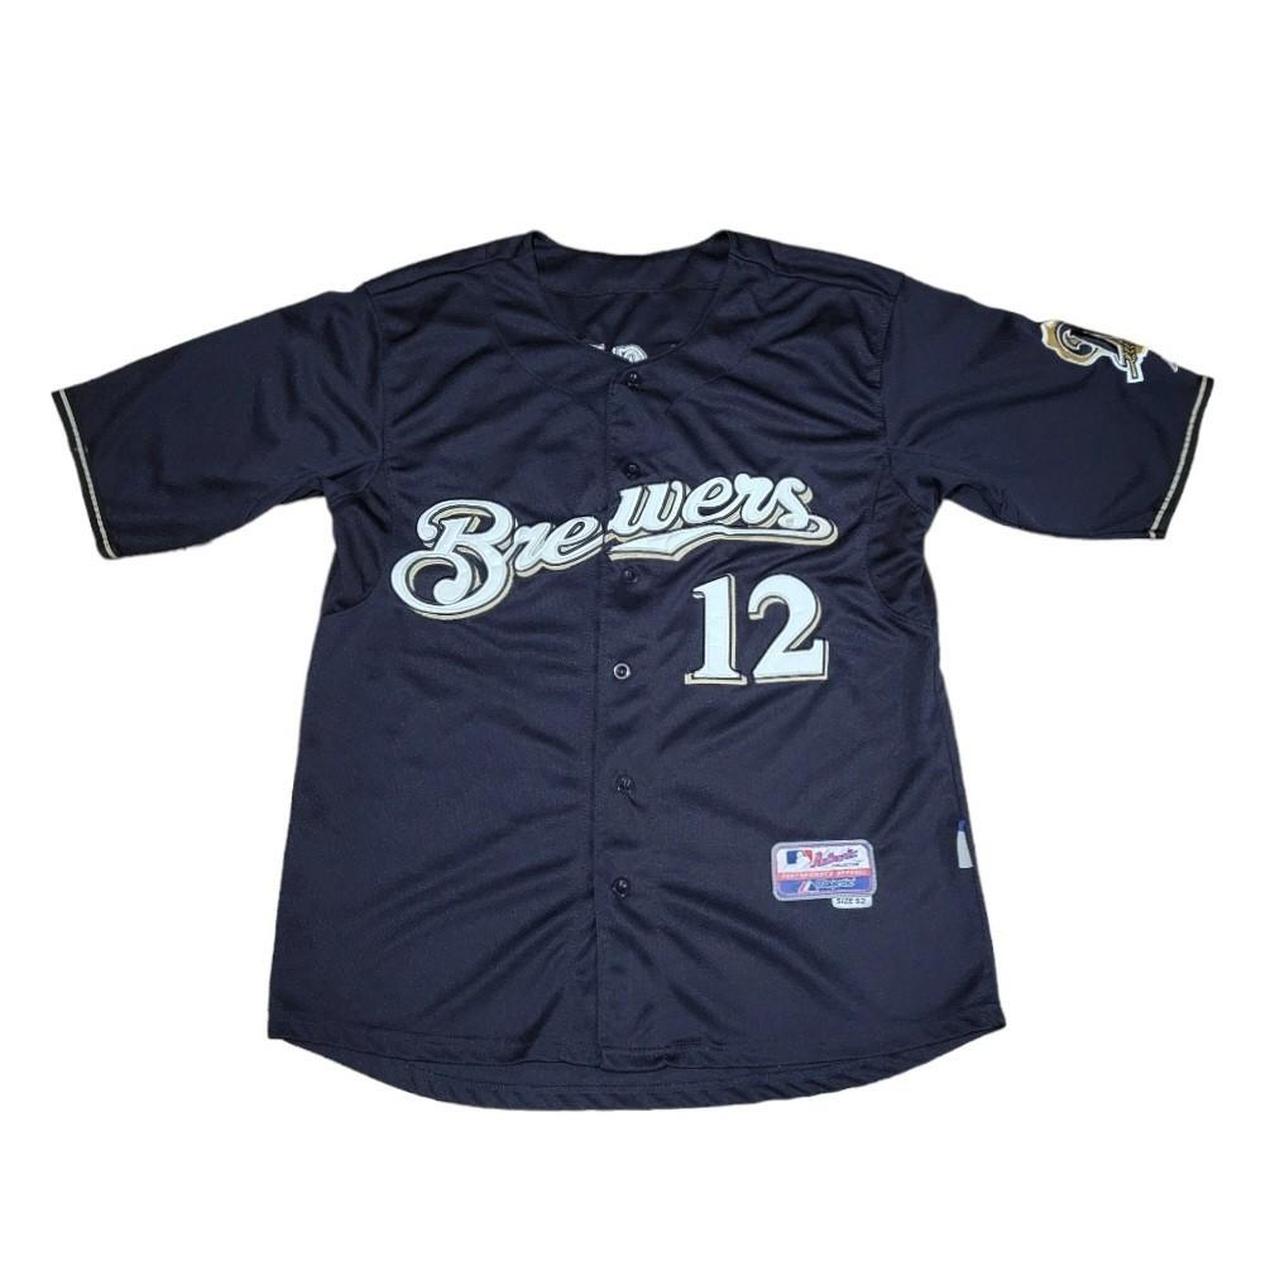 Majestic Men's Majestic Navy/Gold Milwaukee Brewers Authentic